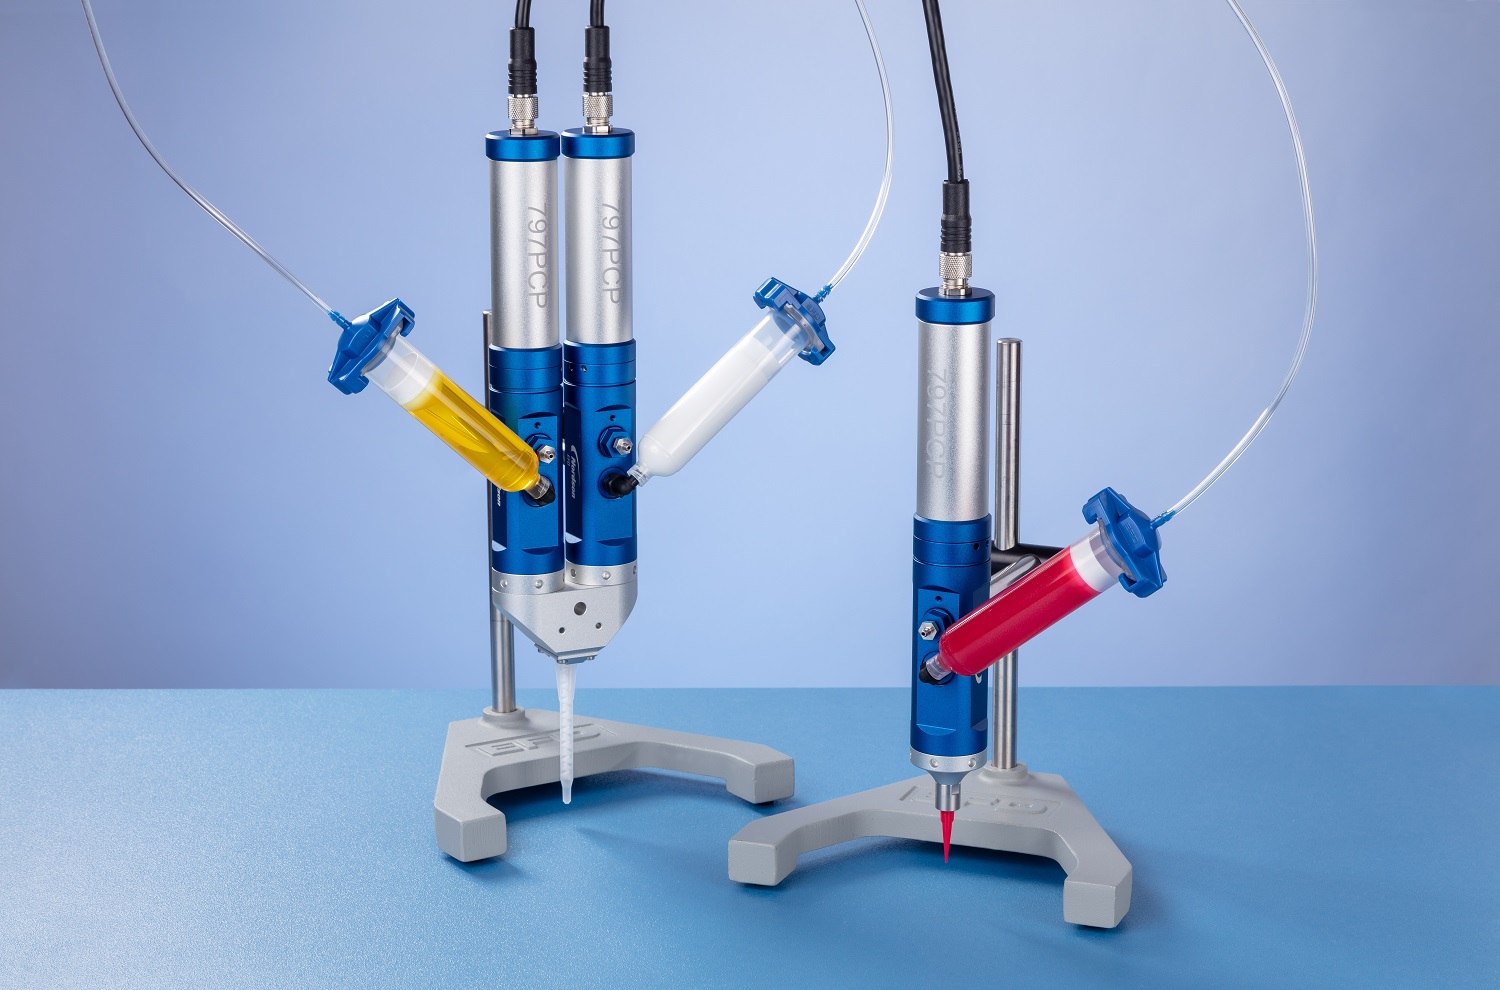 The new 797PCP progressing cavity pump systems are for highly controlled volumetric dispensing of one-part and two-part fluids.